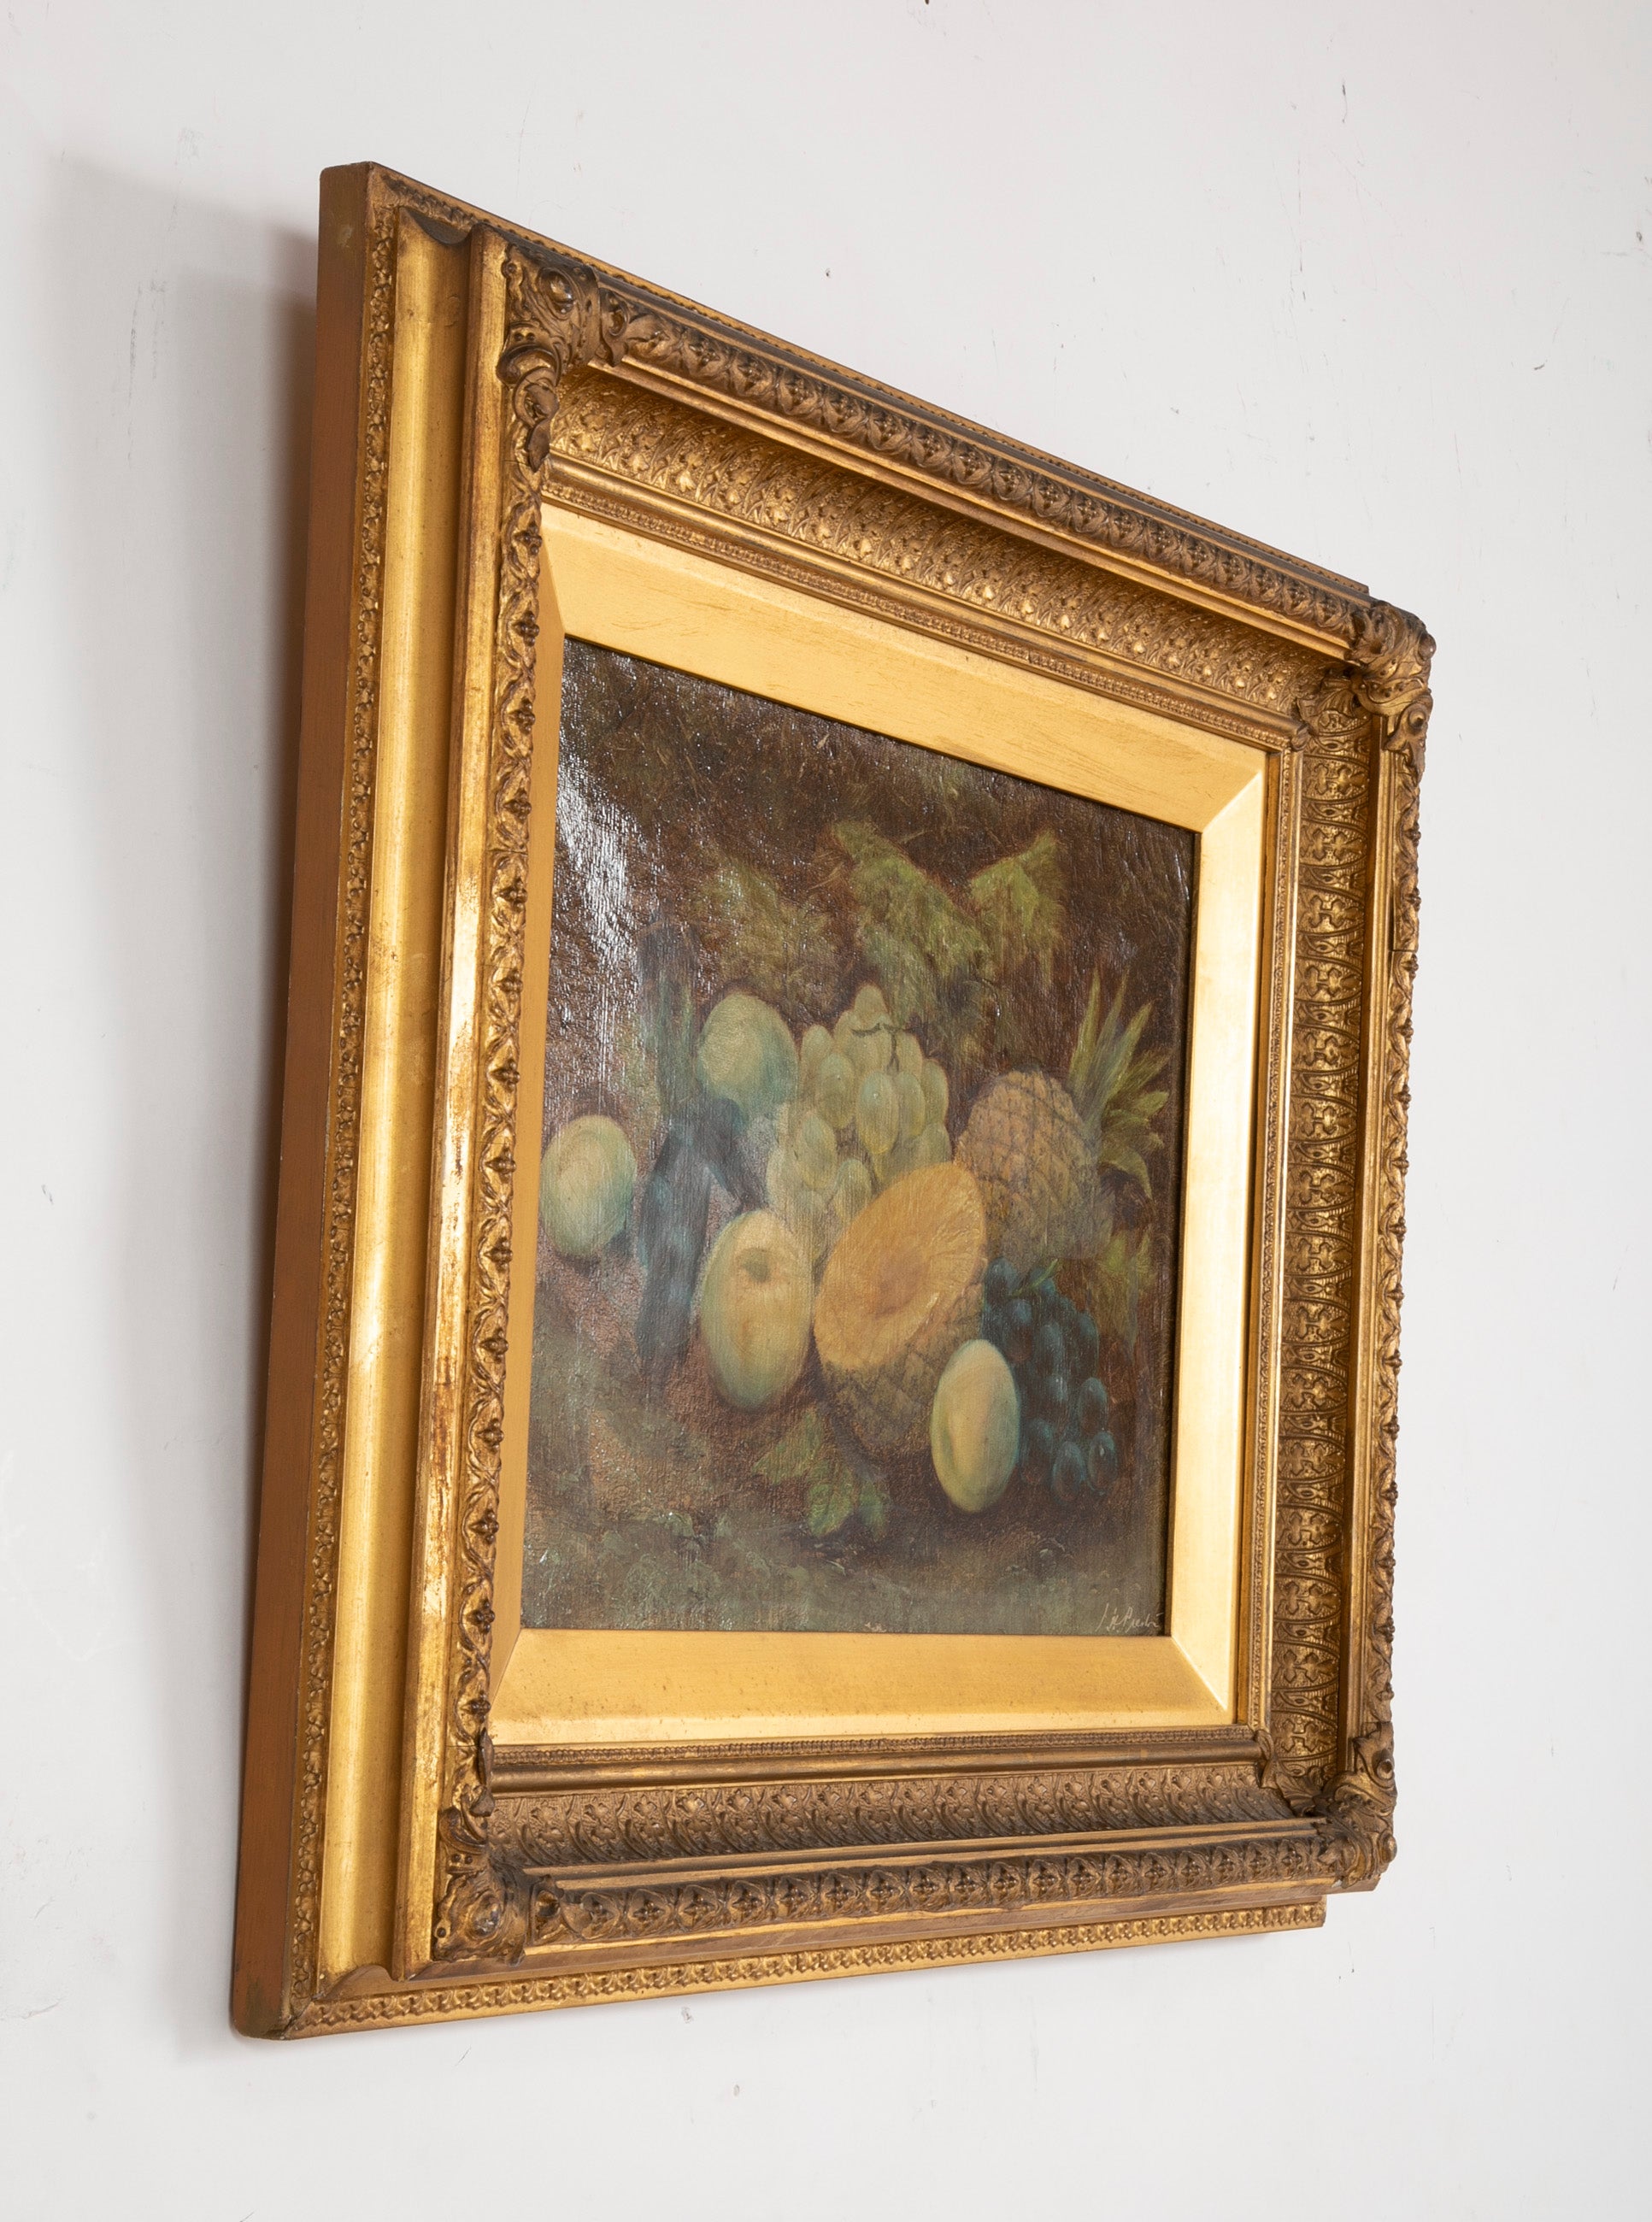 Pair of 19th Century Oil on Canvas Still Life Fruit Paintings